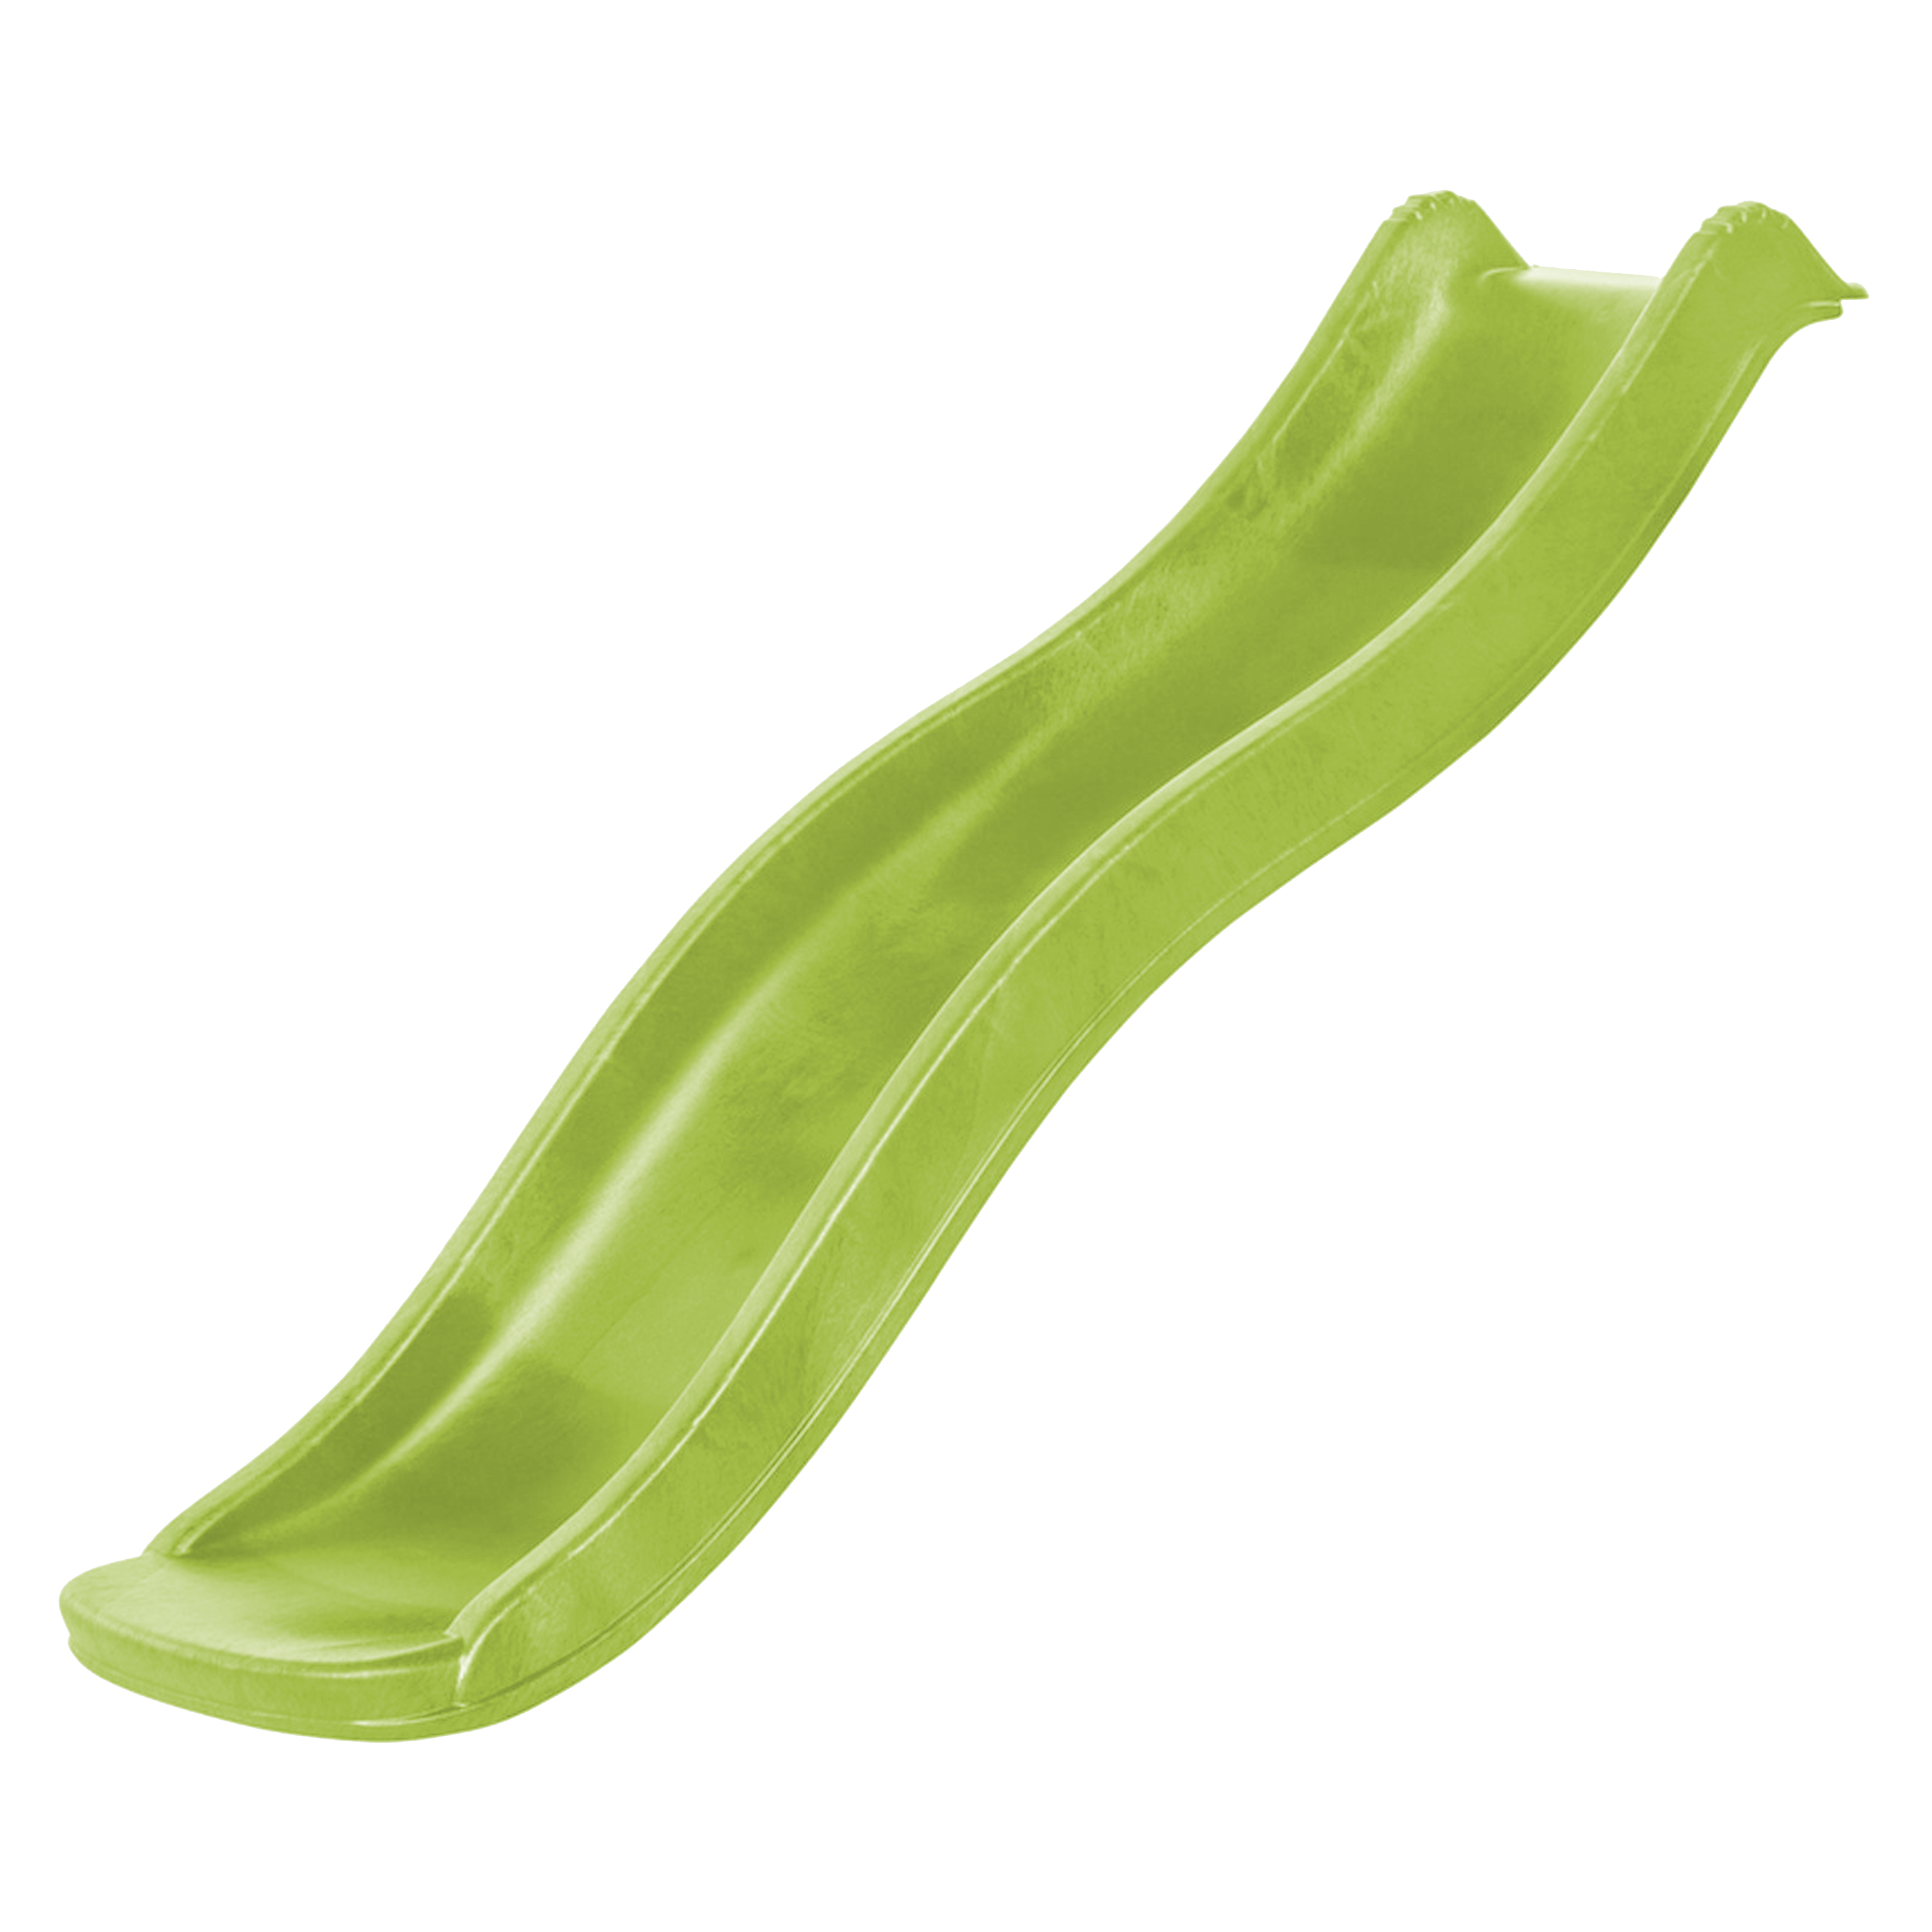 Sky175 Slide with water connection - lime green - 175 cm